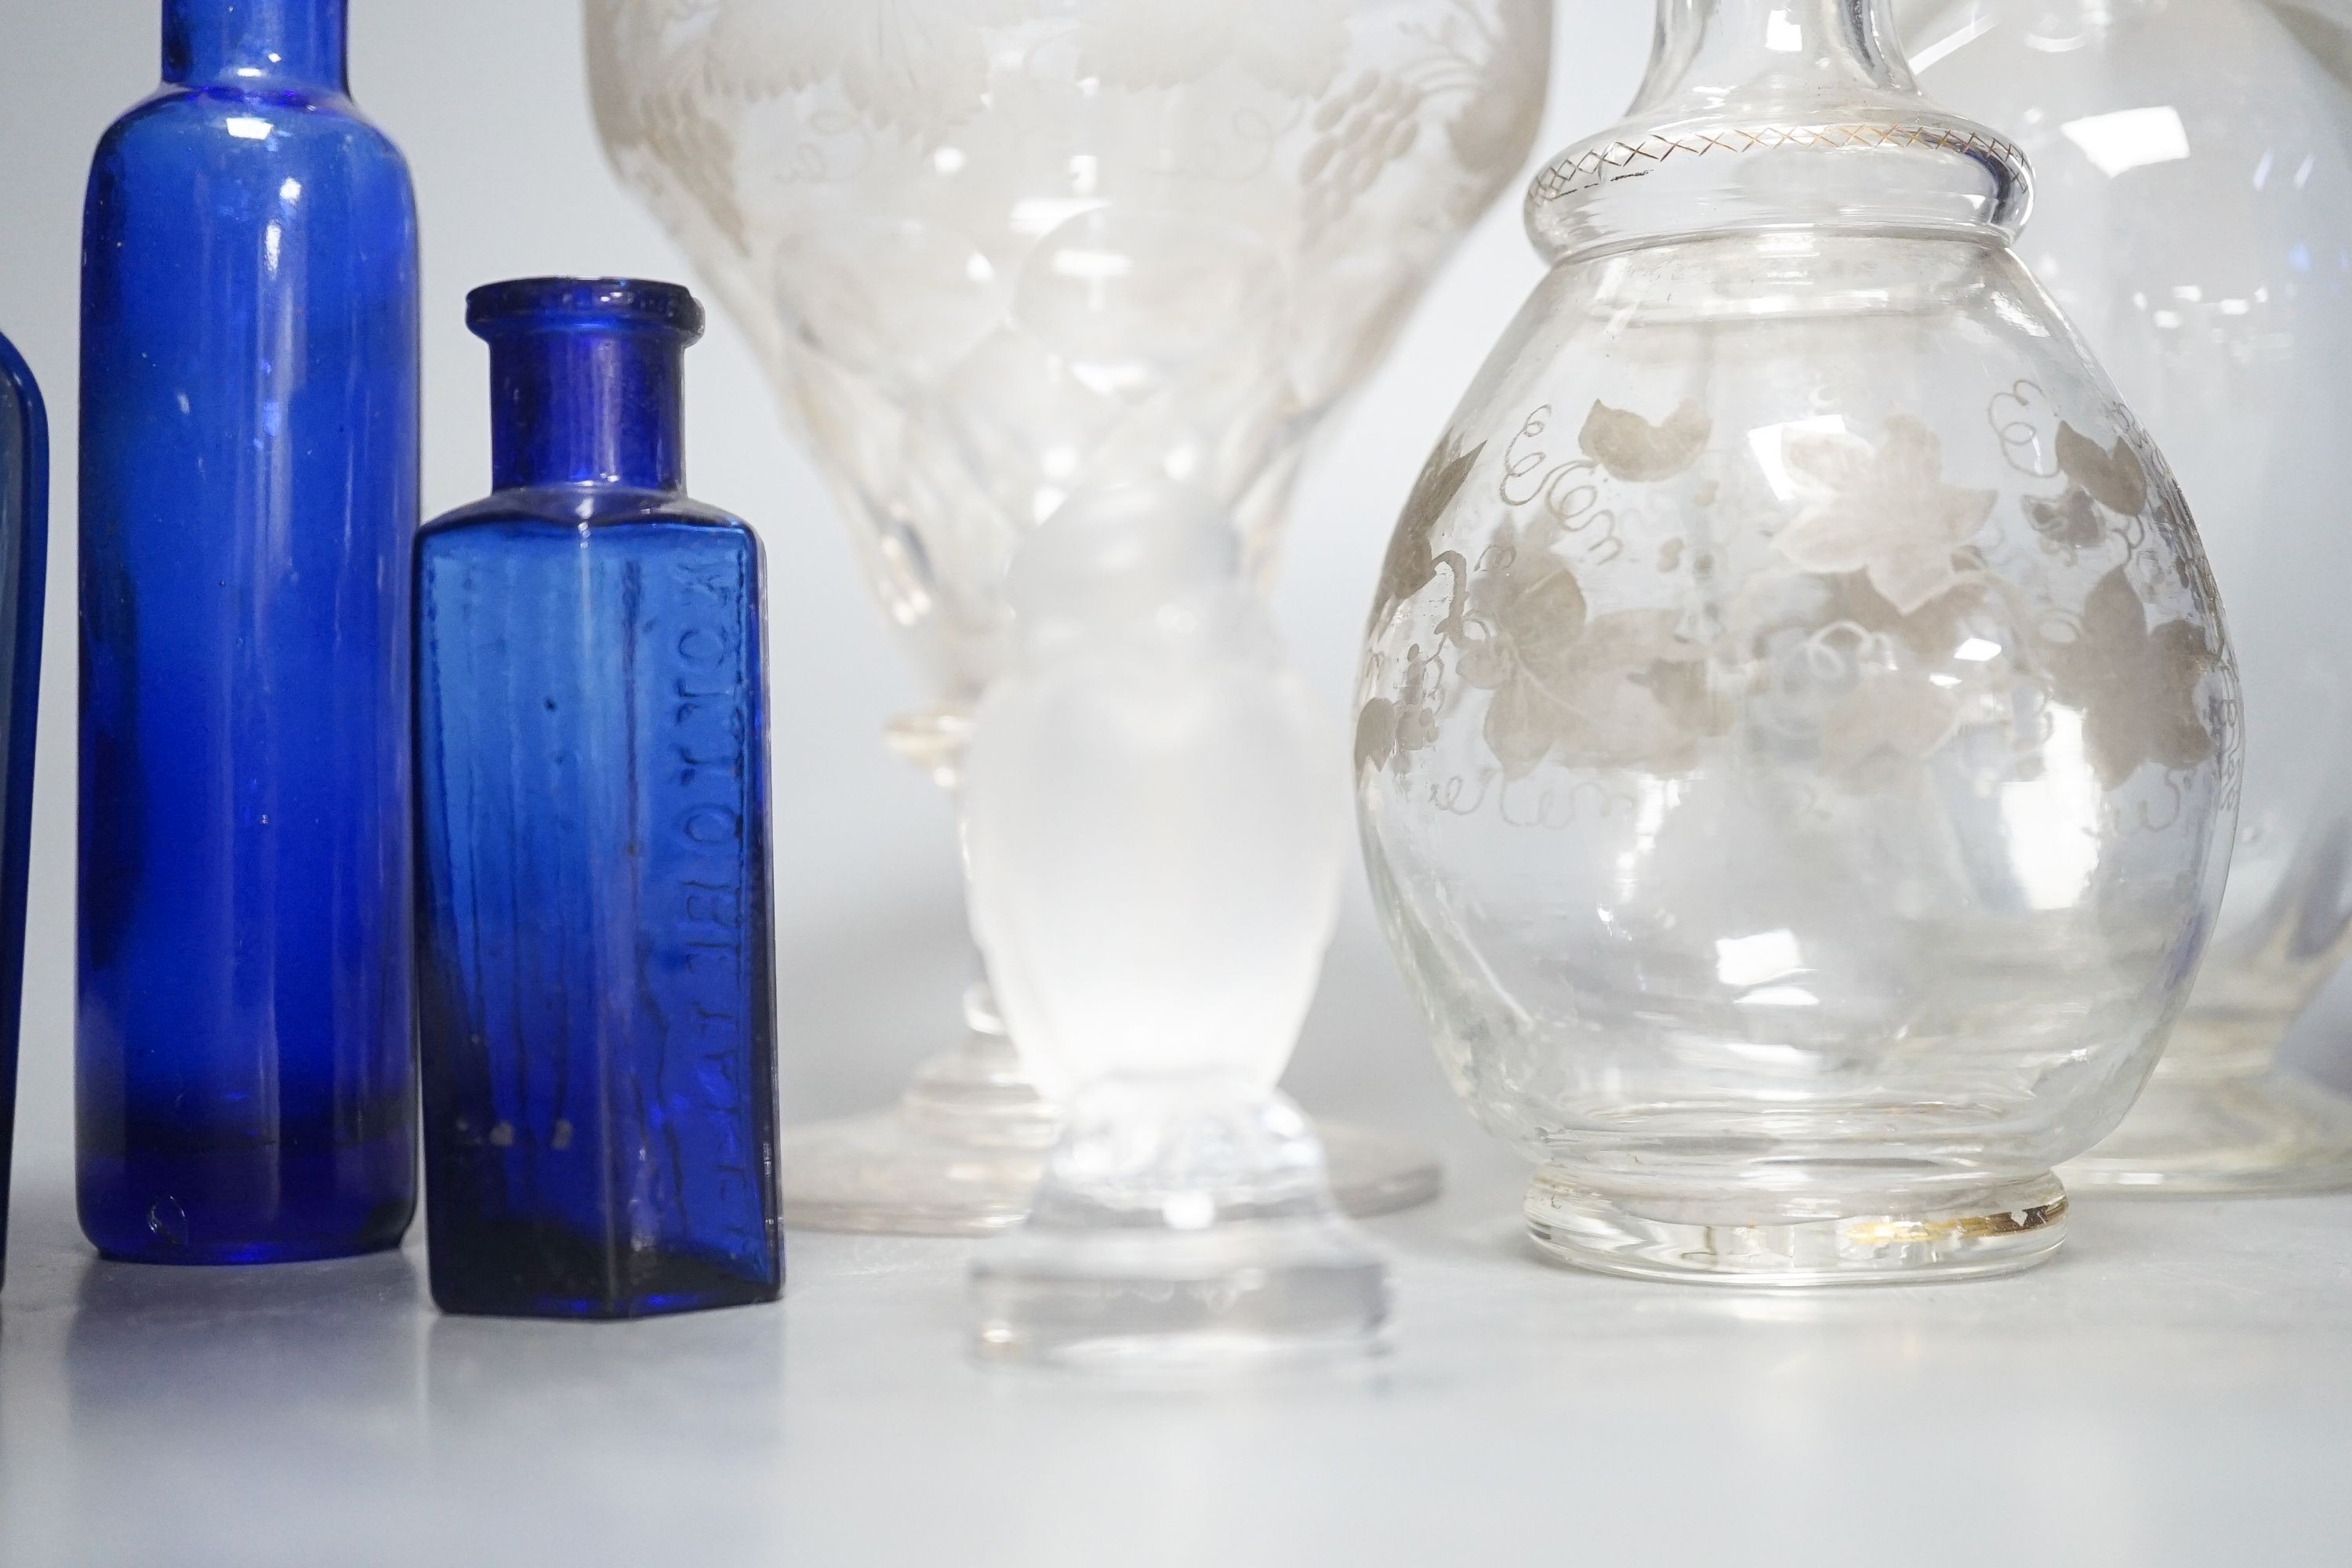 A Lalique frosted glass bird, etched Wedgwood ‘plant a tree ‘73’ glass, other etched glasses, decanters and blue glass pharmacy bottles